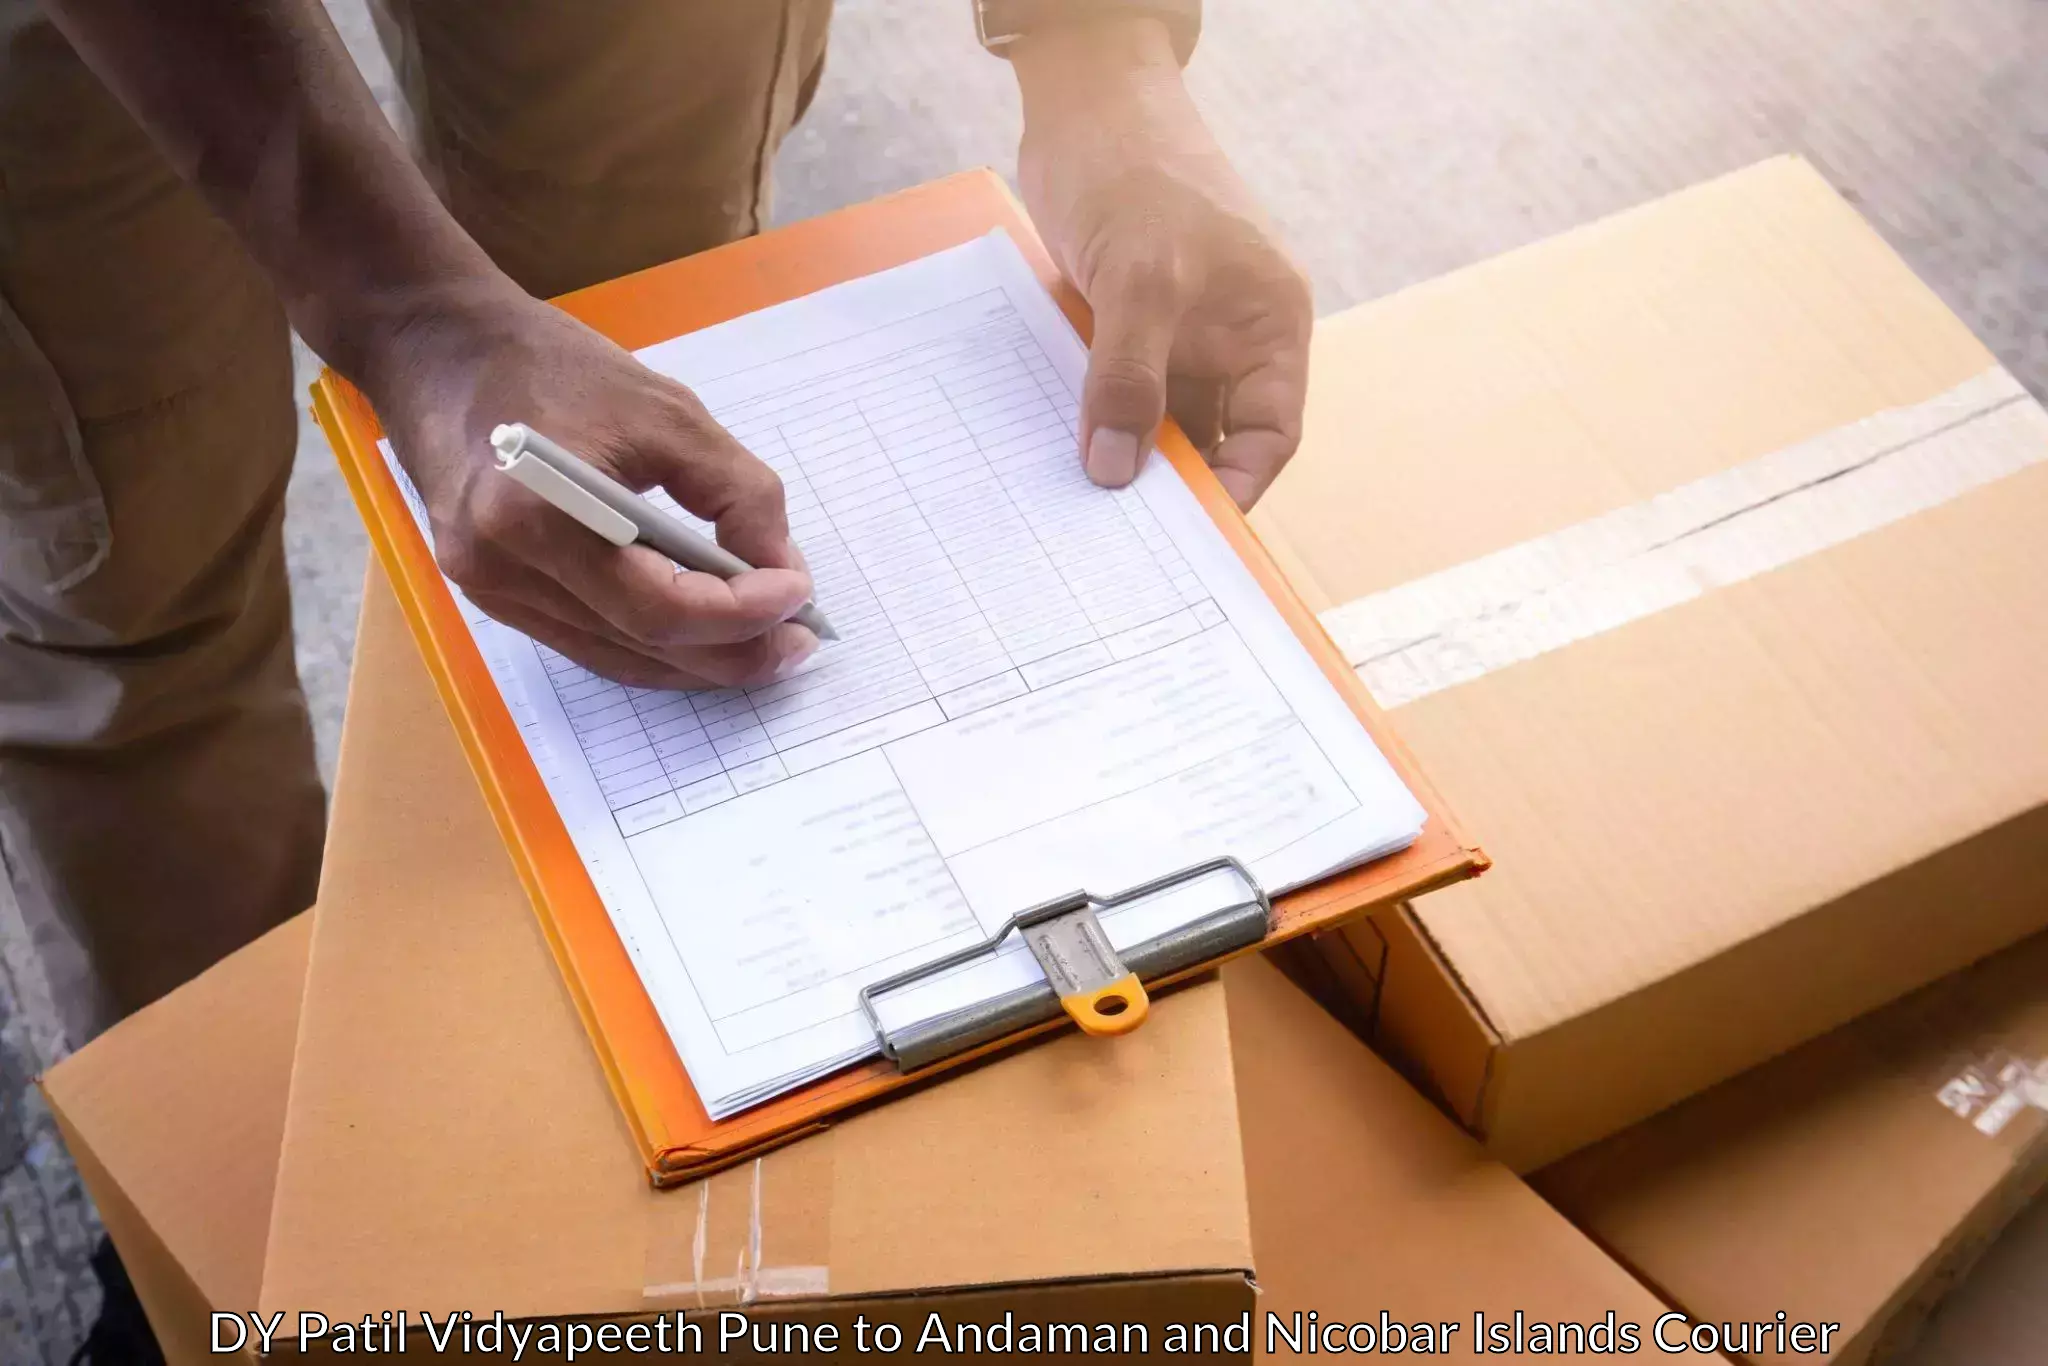 Fast shipping solutions in DY Patil Vidyapeeth Pune to Andaman and Nicobar Islands